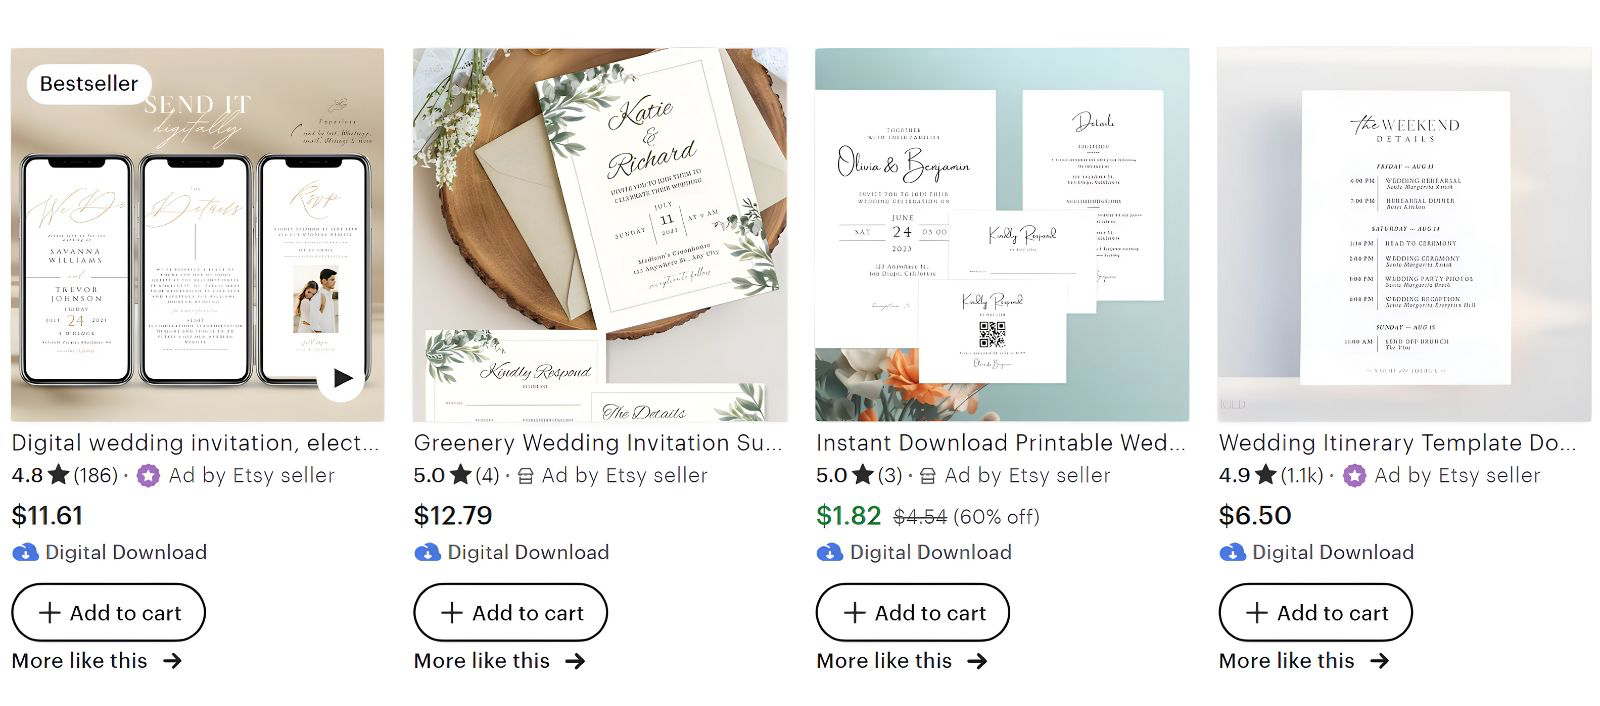 Printable wedding invitations connected  Etsy